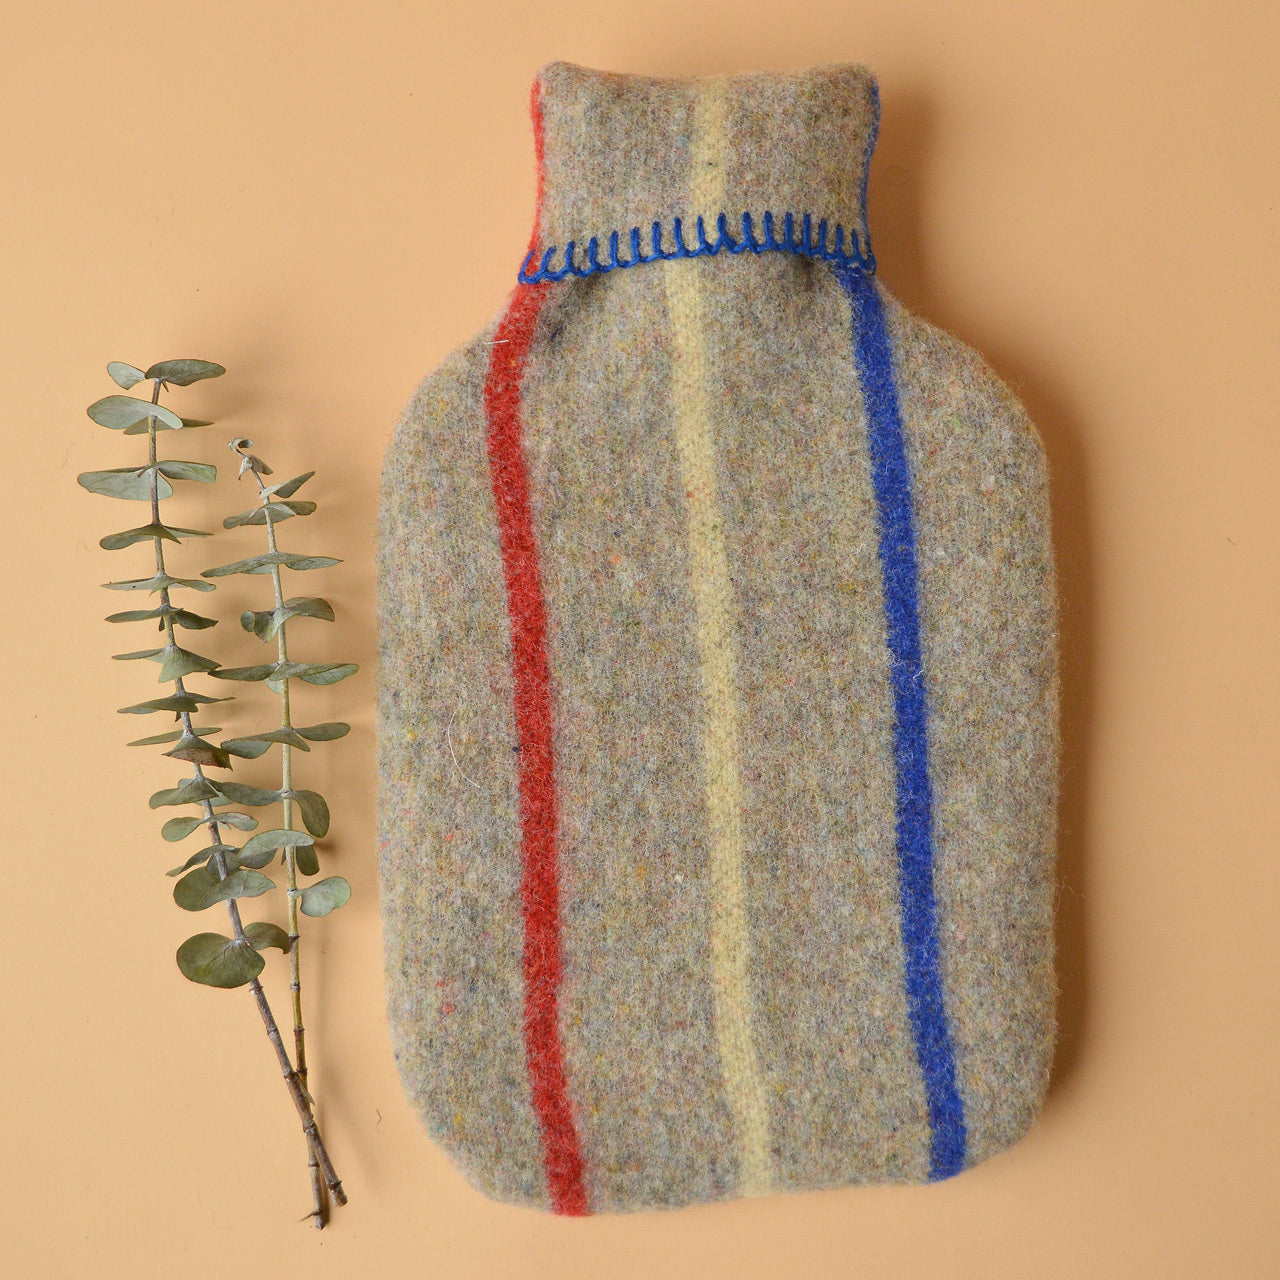 Hot Water Bottle with 50/50 Recycled/Virgin Wool Cover - Vintage Stripes